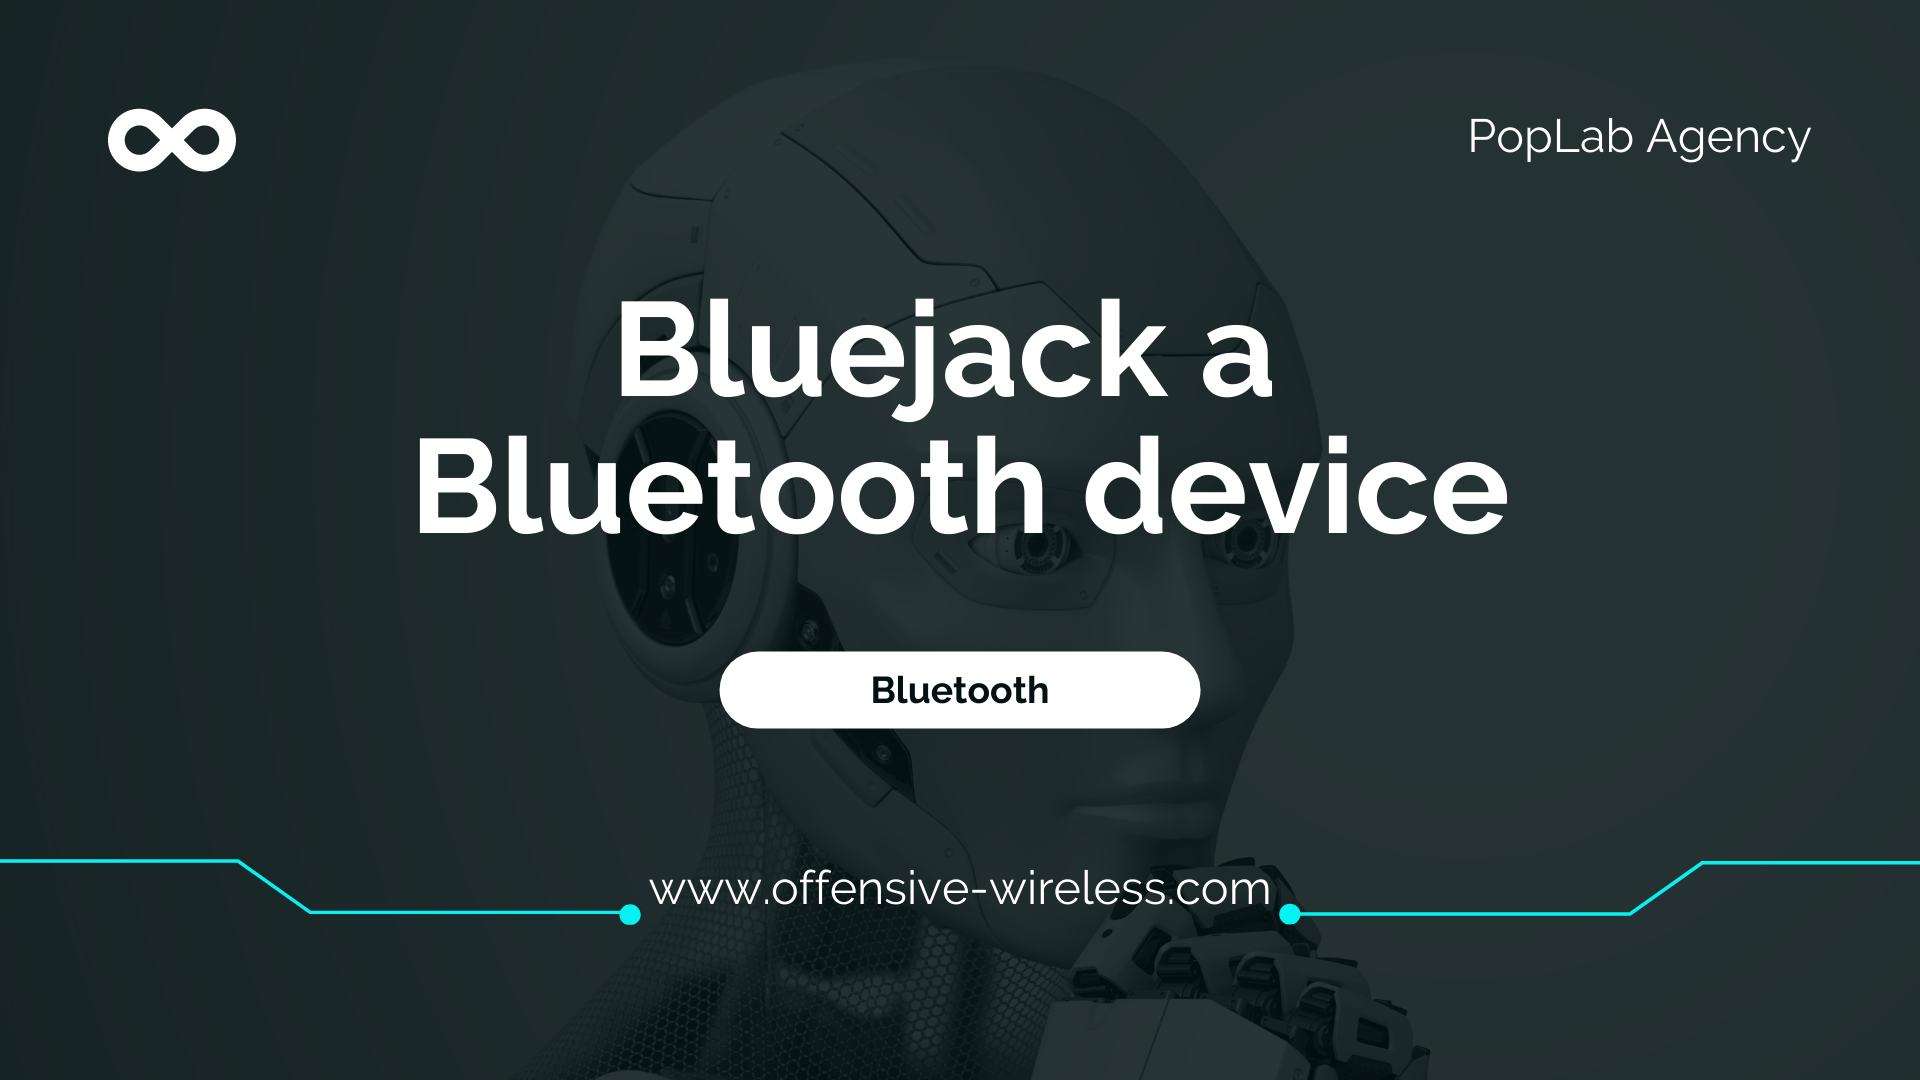 How to Bluejack a Bluetooth device